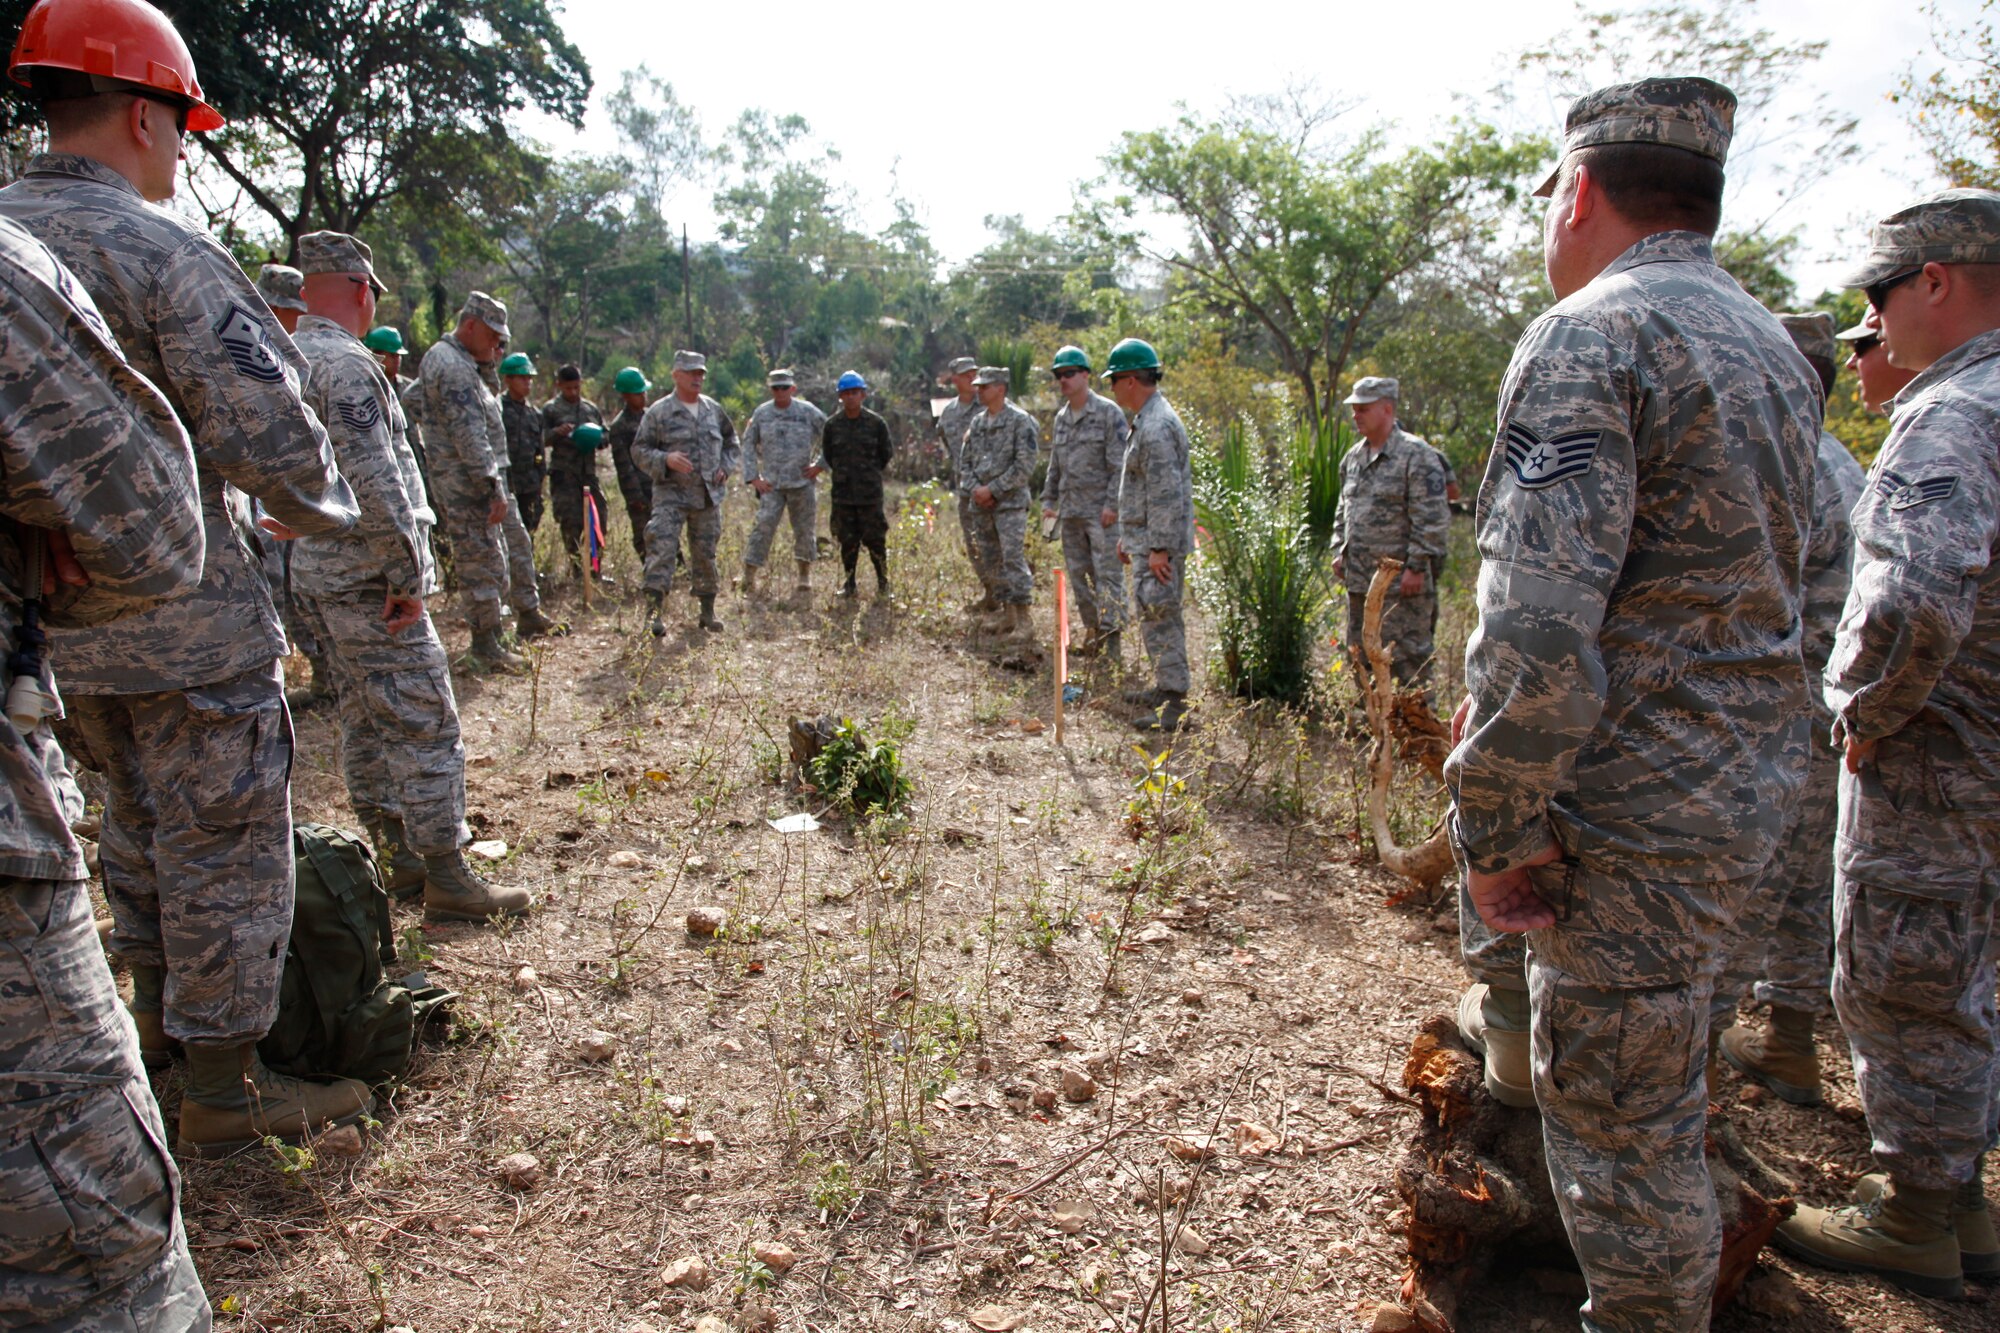 Guatemalan, U.S. Army, and 188th Civil Engineer Squadron members have a safety briefing during Beyond the Horizons, prior to beginning work in El Robles, Guatemala April 7, 2014. Beyond the Horizons is a U.S. partnership with the government of Guatemala conducting various medical, dental and civic actions programs, providing focused humanitarian assistance. (U.S. Army photo by Sgt. 1st Class Marcus J. Quarterman)